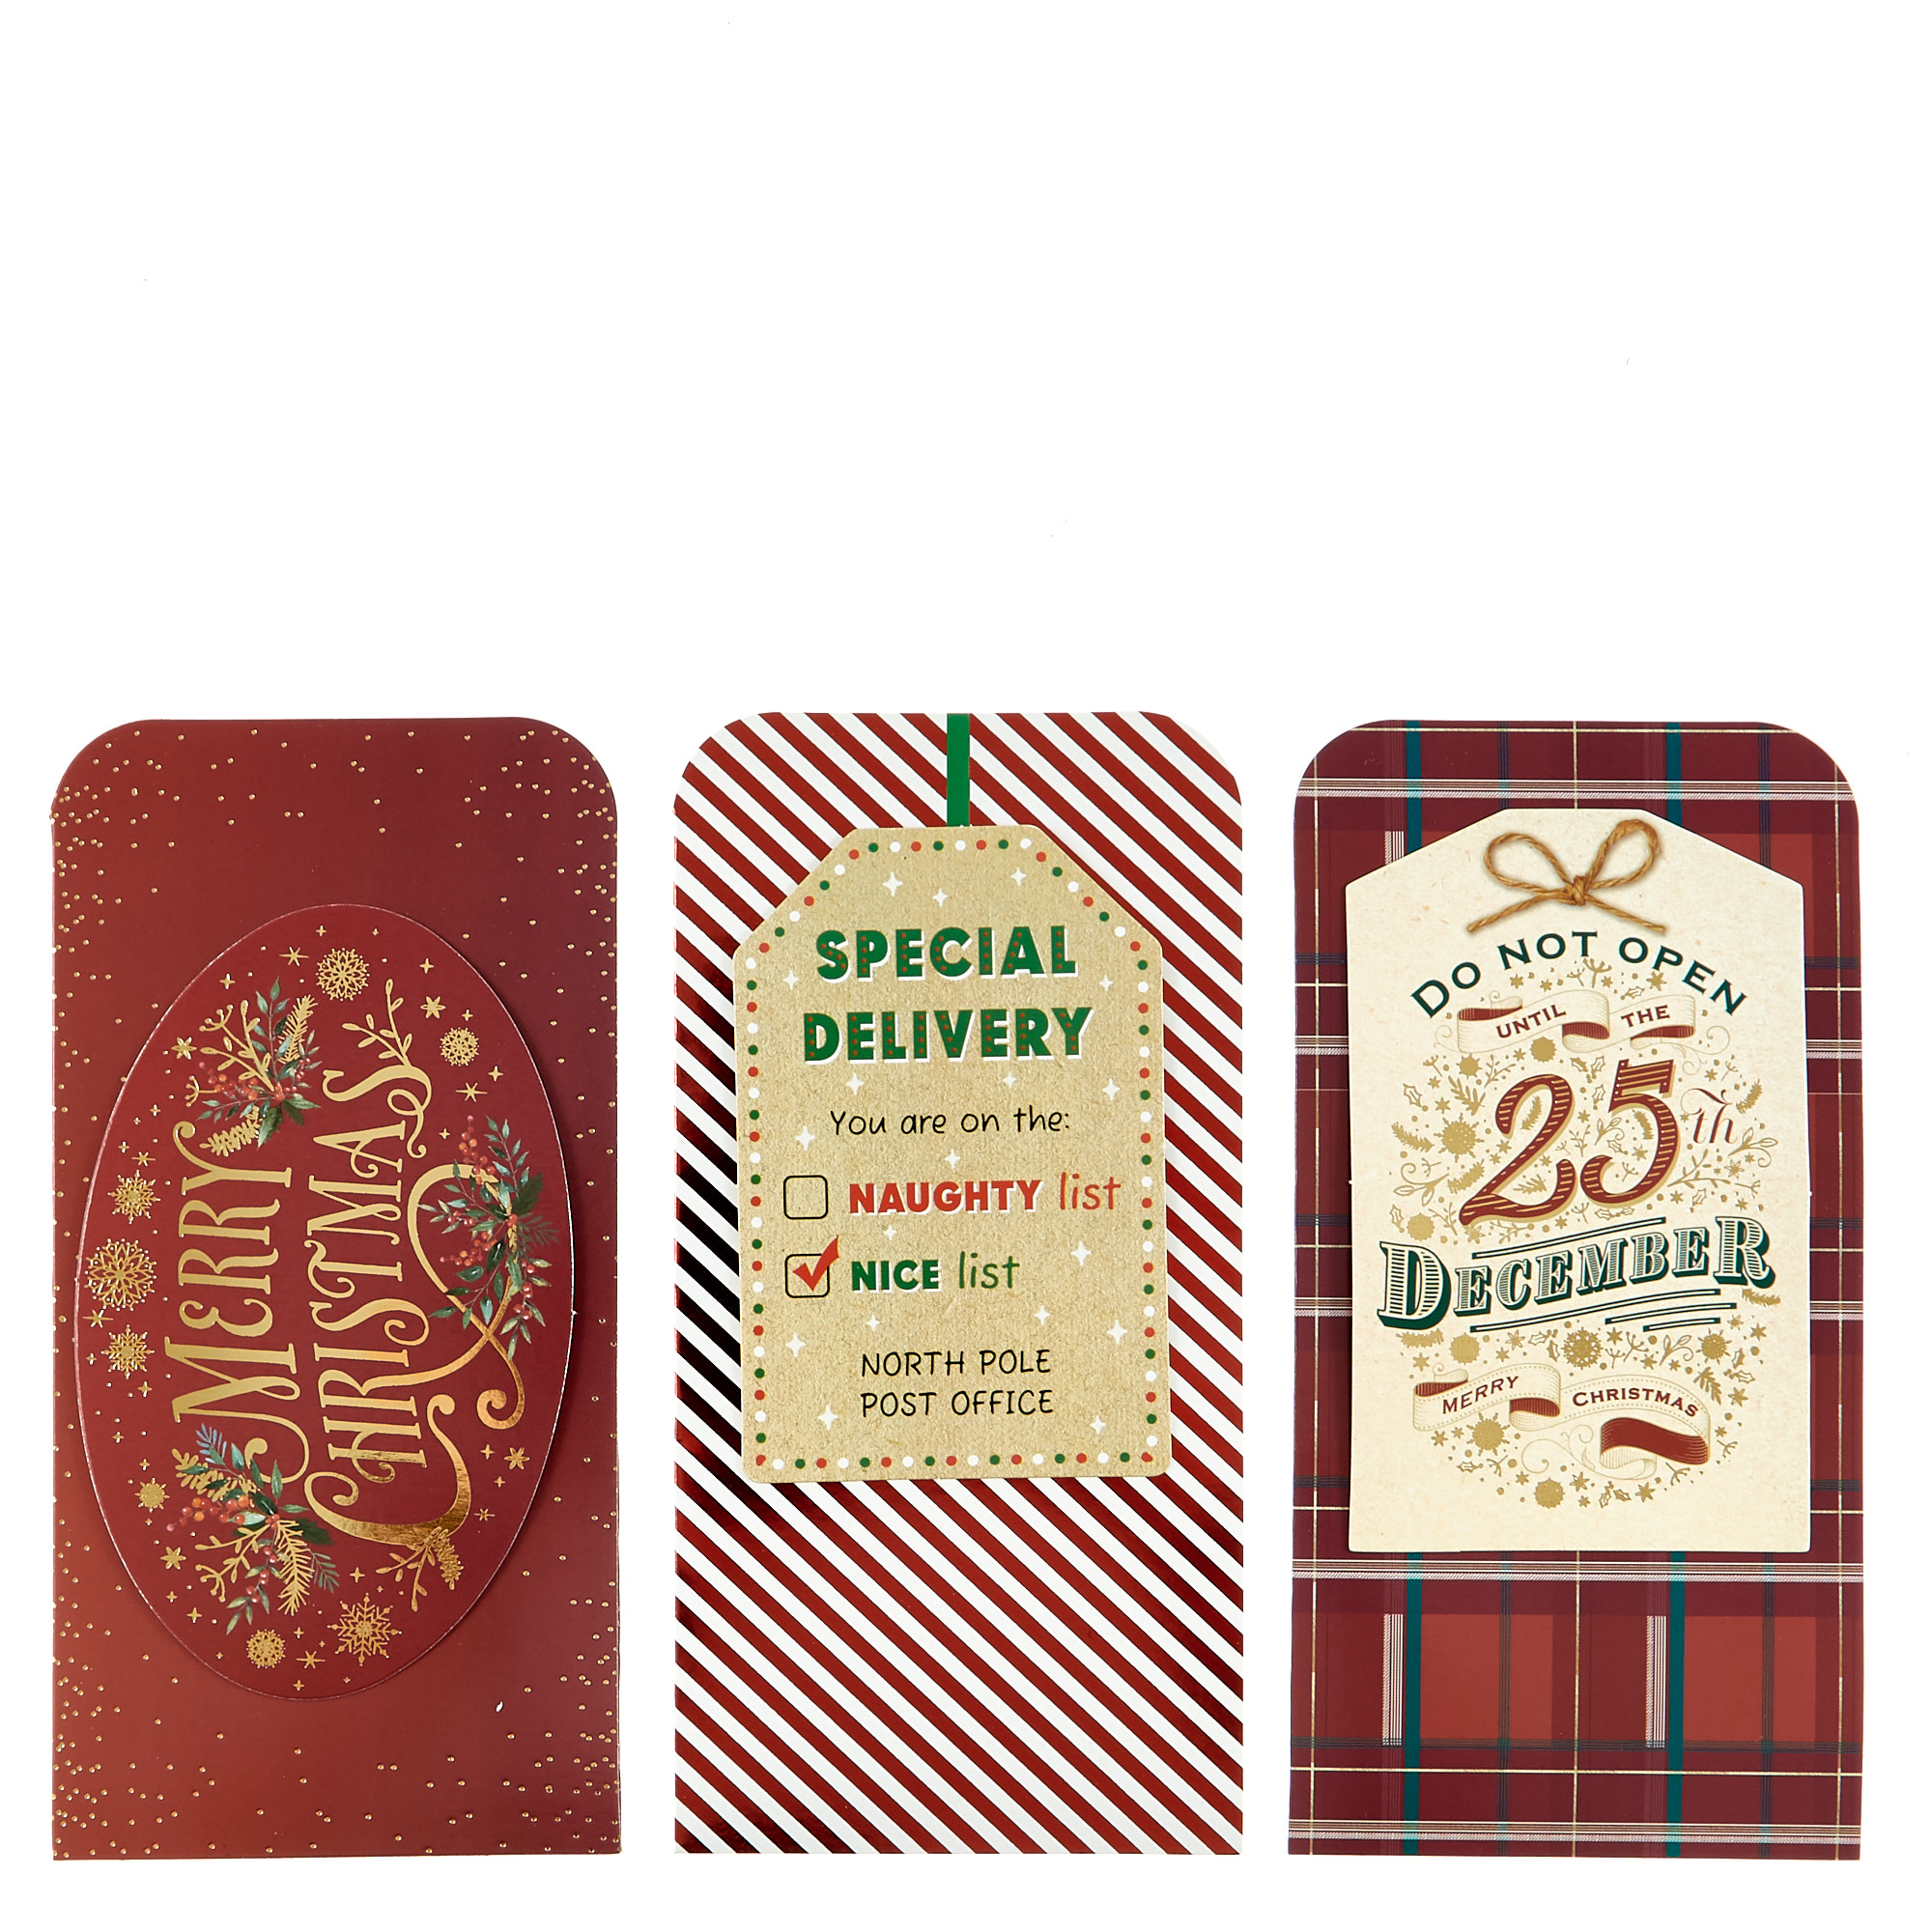 Handcrafted Merry Christmas Money Wallets - Pack of 3